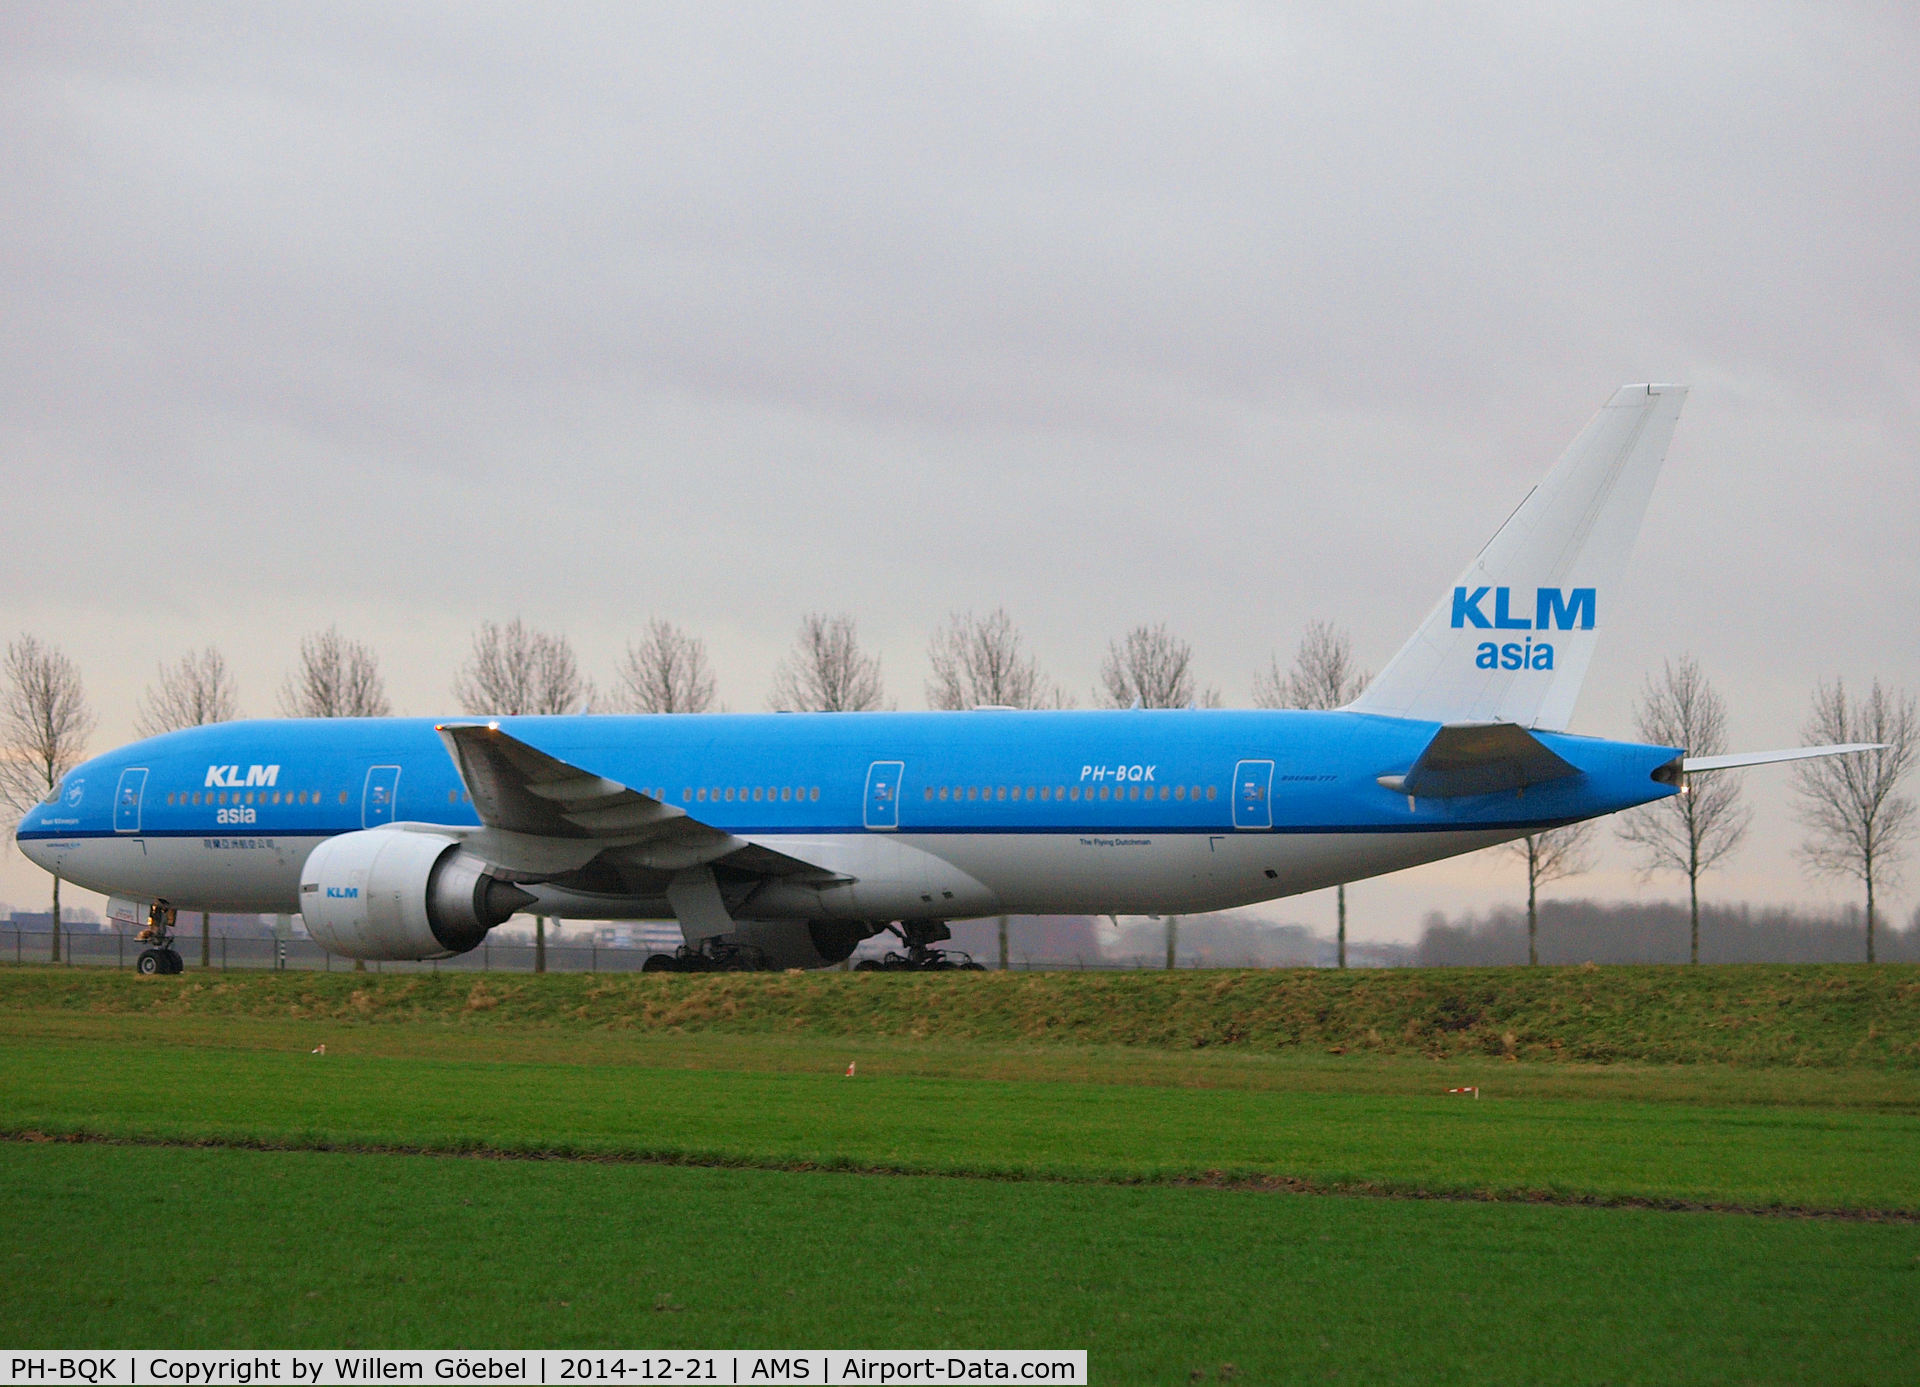 PH-BQK, 2005 Boeing 777-206/ER C/N 29399, Taxi from runway 18R to the gate of Schiphol Airport